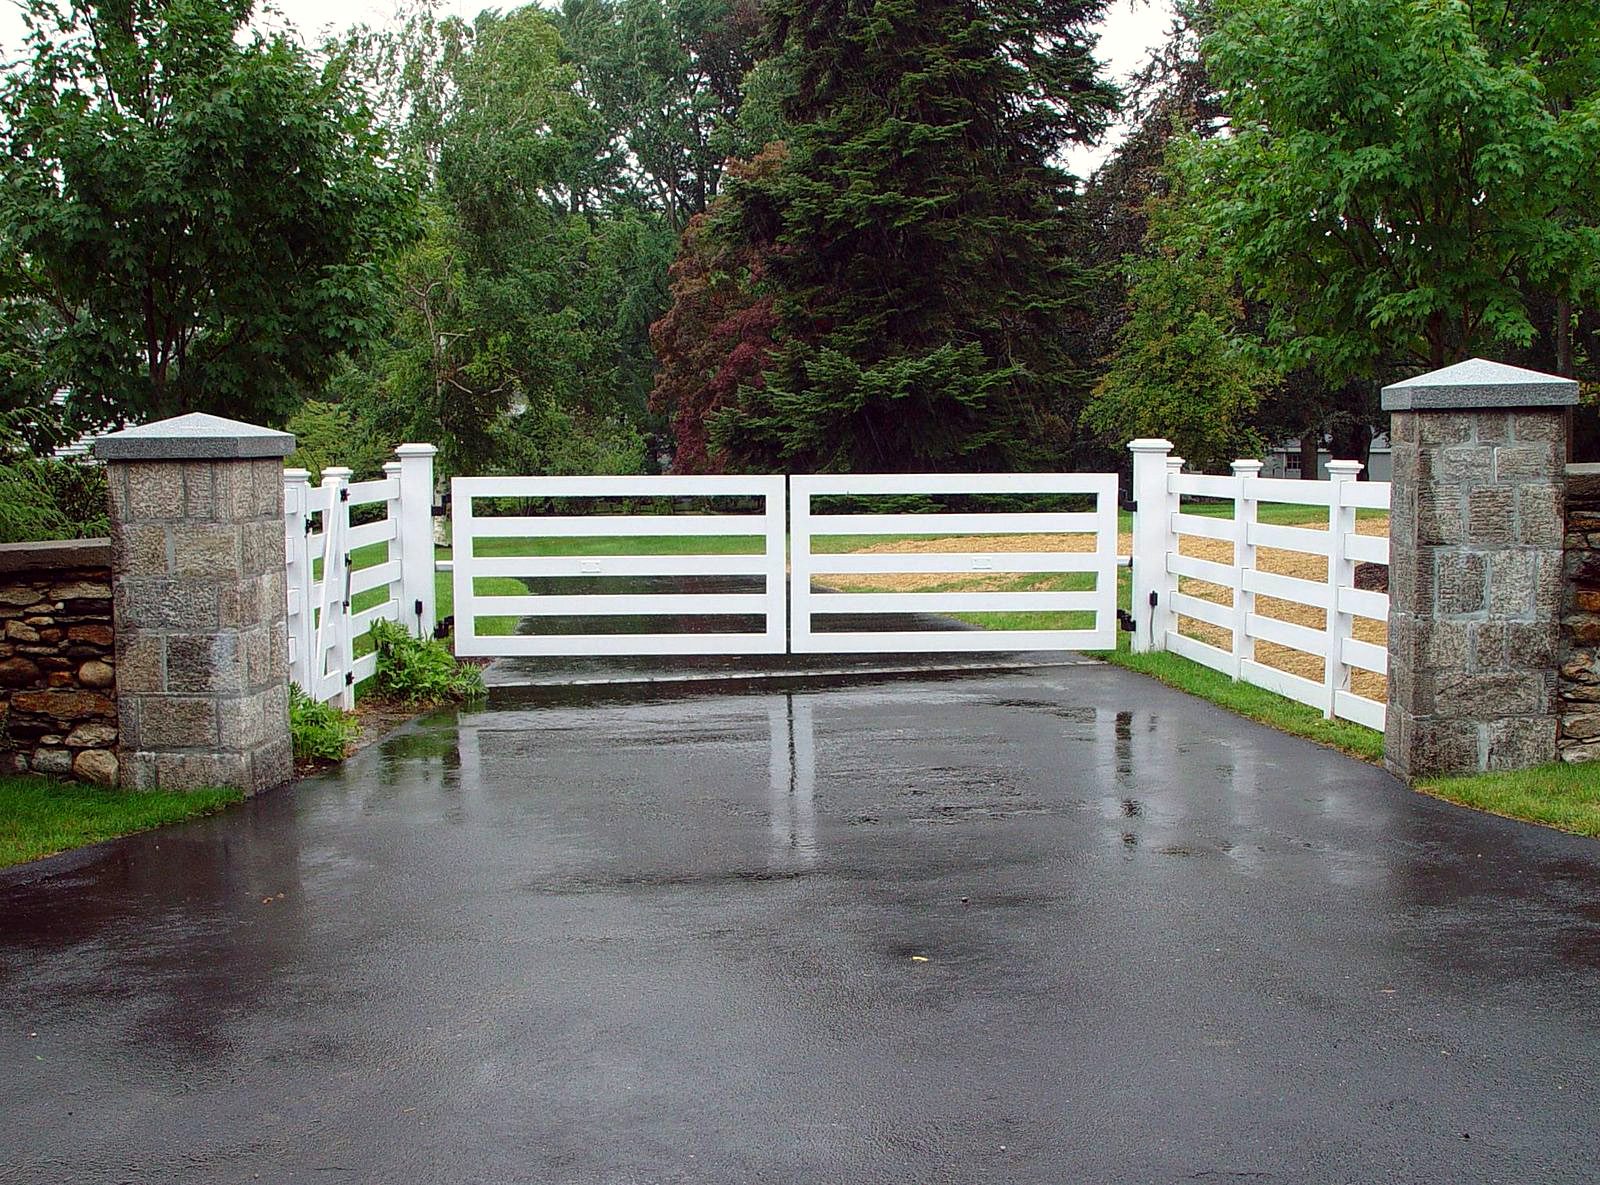 Simple white wooden ranch gate with stone pillars